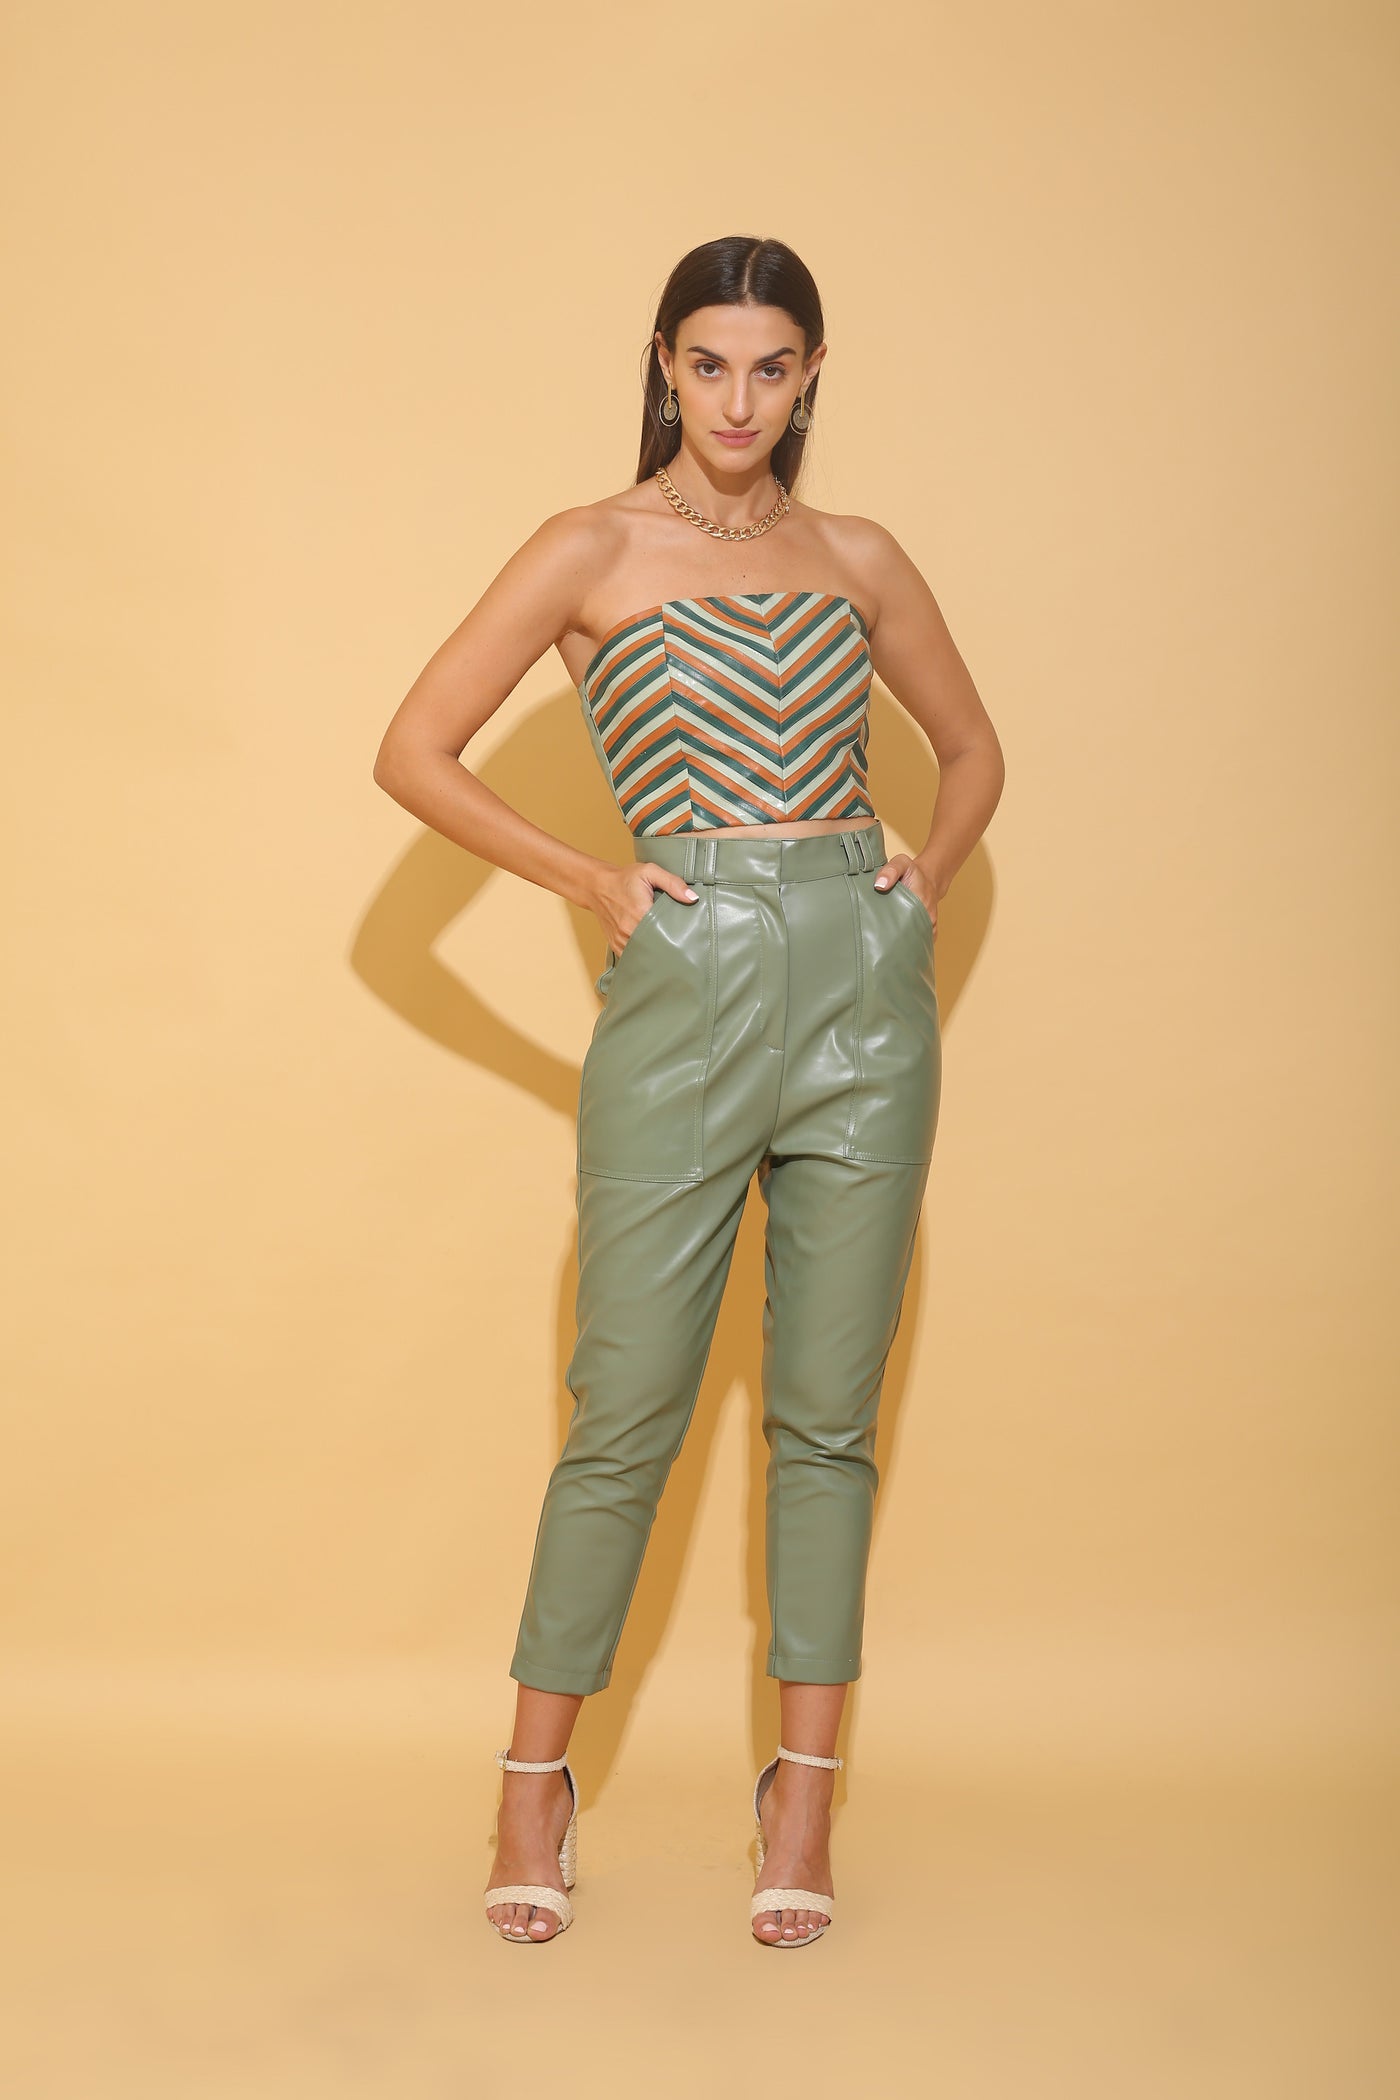 Chevron Tube Top and Sage Green Leather Co-ord Set